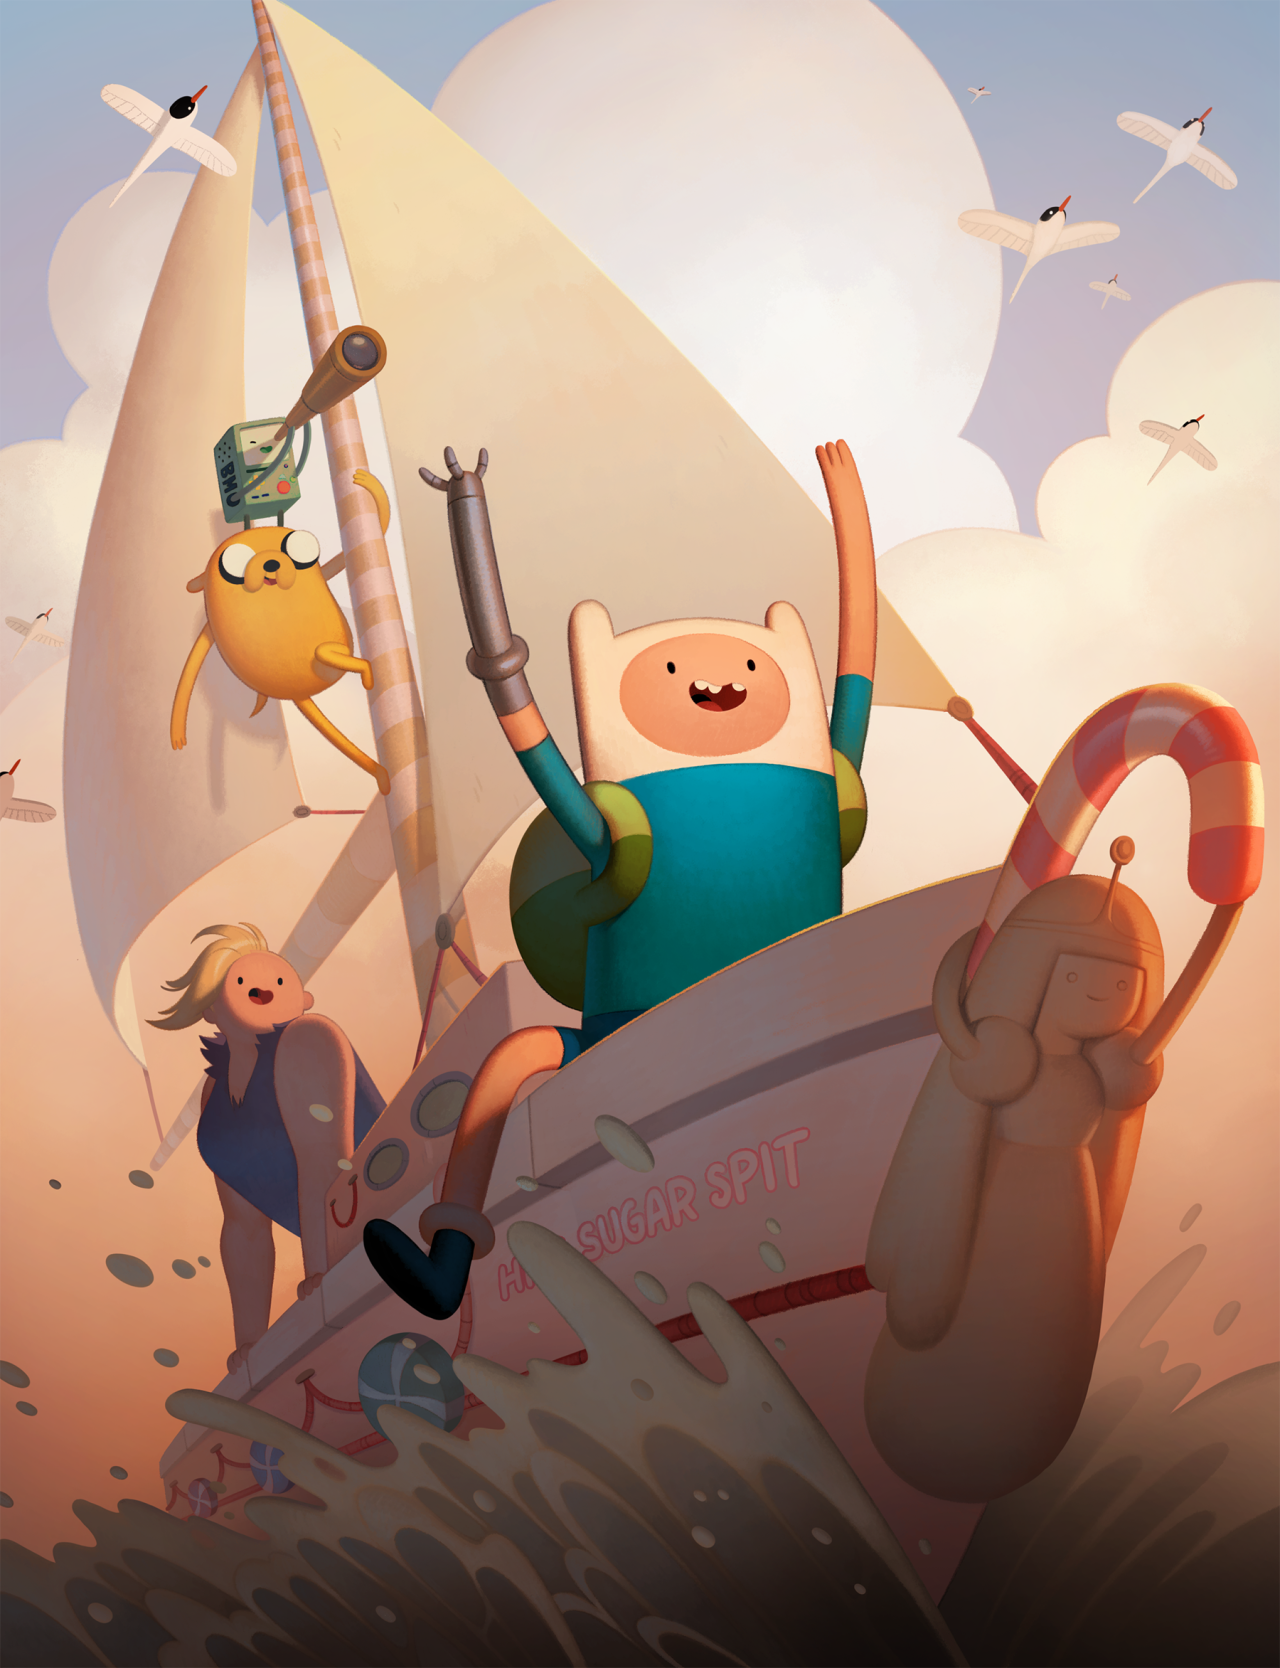 Adventure Time: Islands DVD cover artwork designed and painted by character &amp;